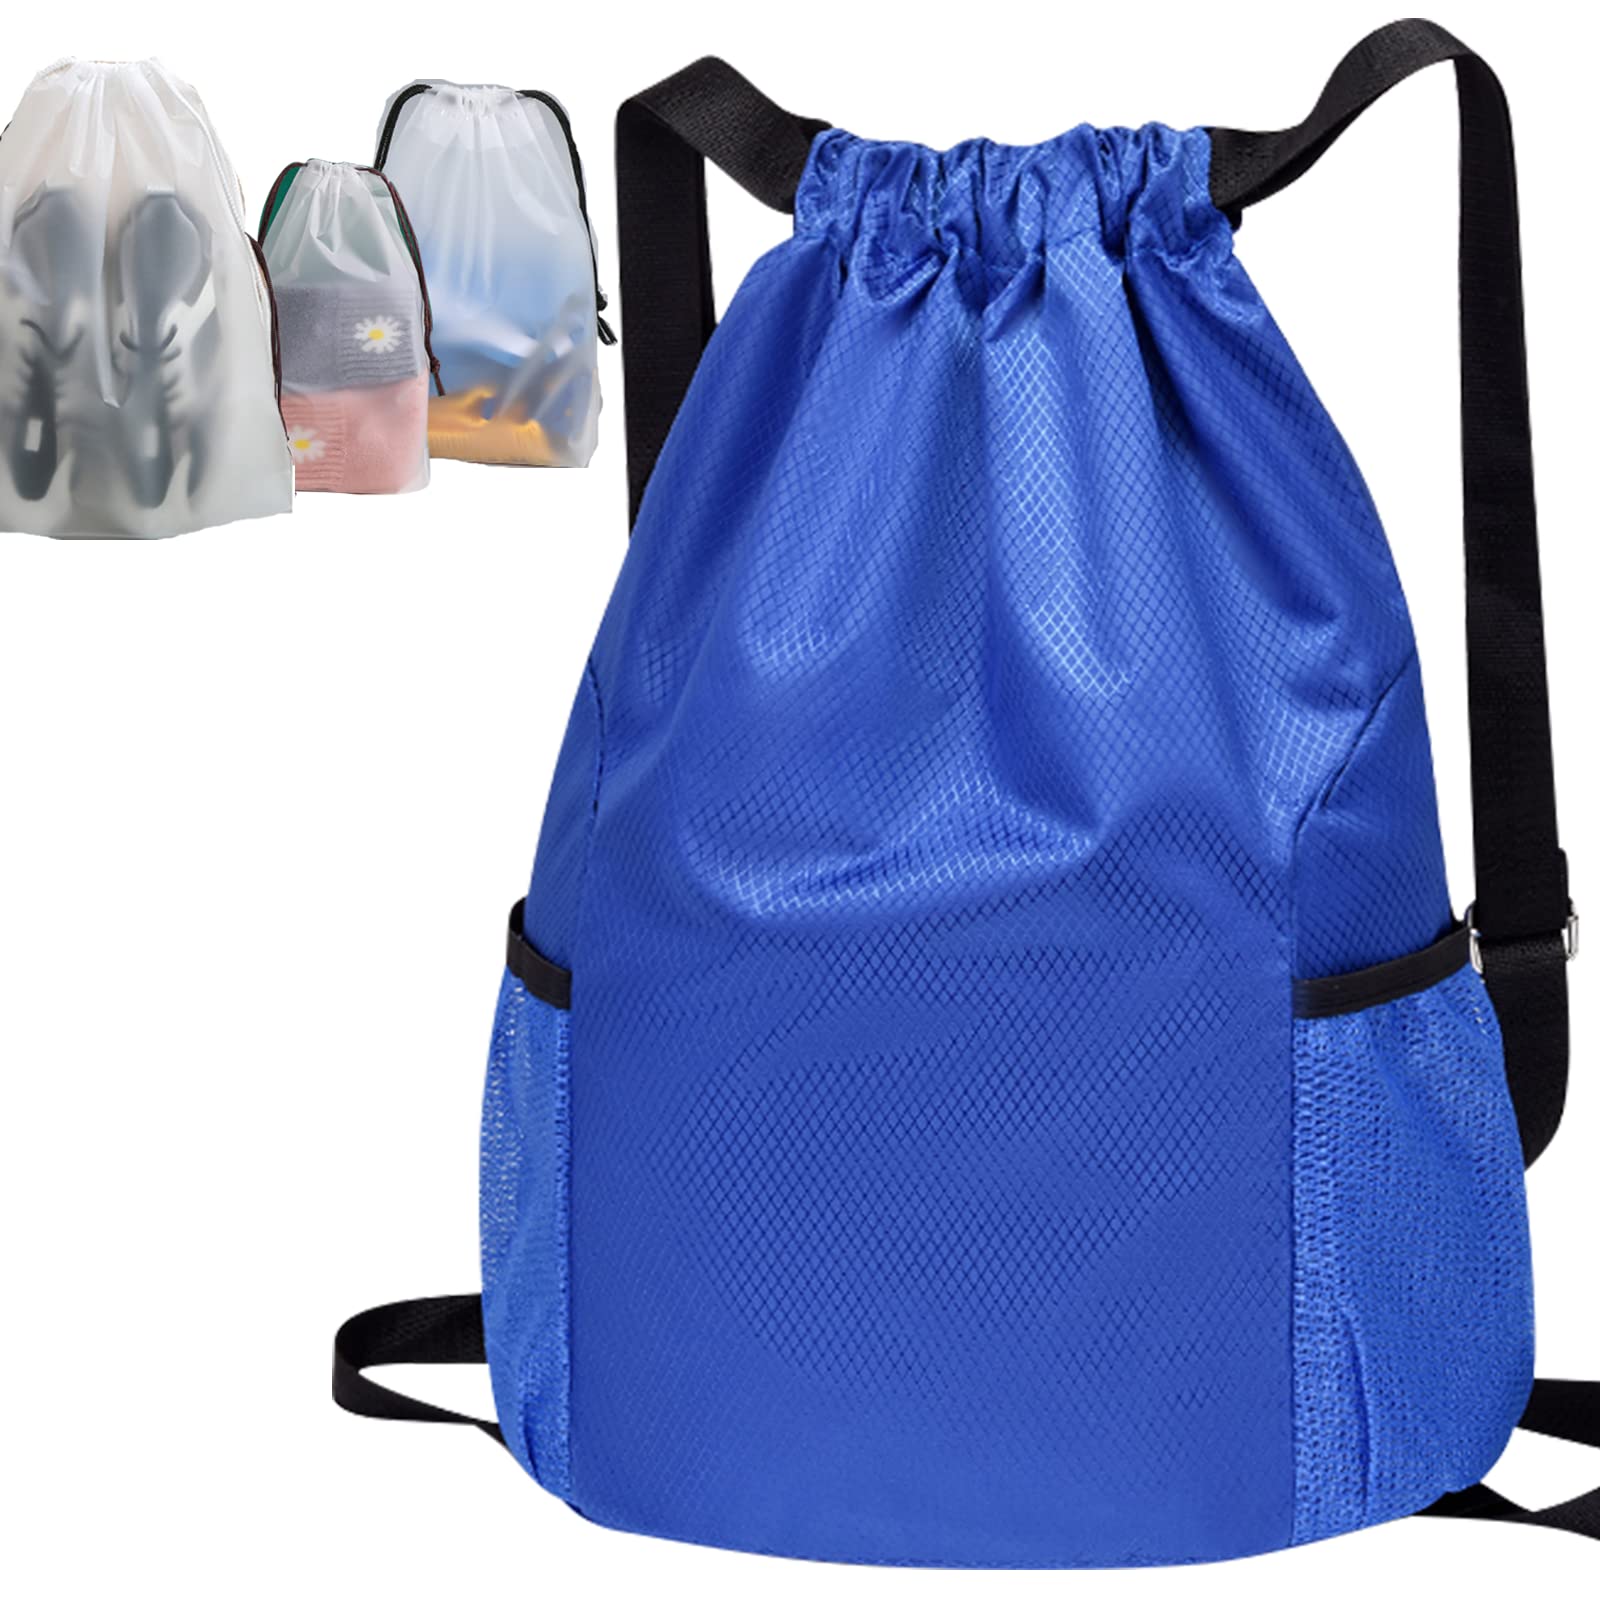 24 X DRAWSTRING BACKPACK,SWIMMING SCHOOL PE KIT BAGS WATER RESISTANT,STRING SPORTS GYM SACK LARGE CAPACITY WITH INSIDE ZIPPER POCKET FOR ADULTS WOMEN MEN KIDS STUDENTS(BLUE,LARGE) - TOTAL RRP £200: L